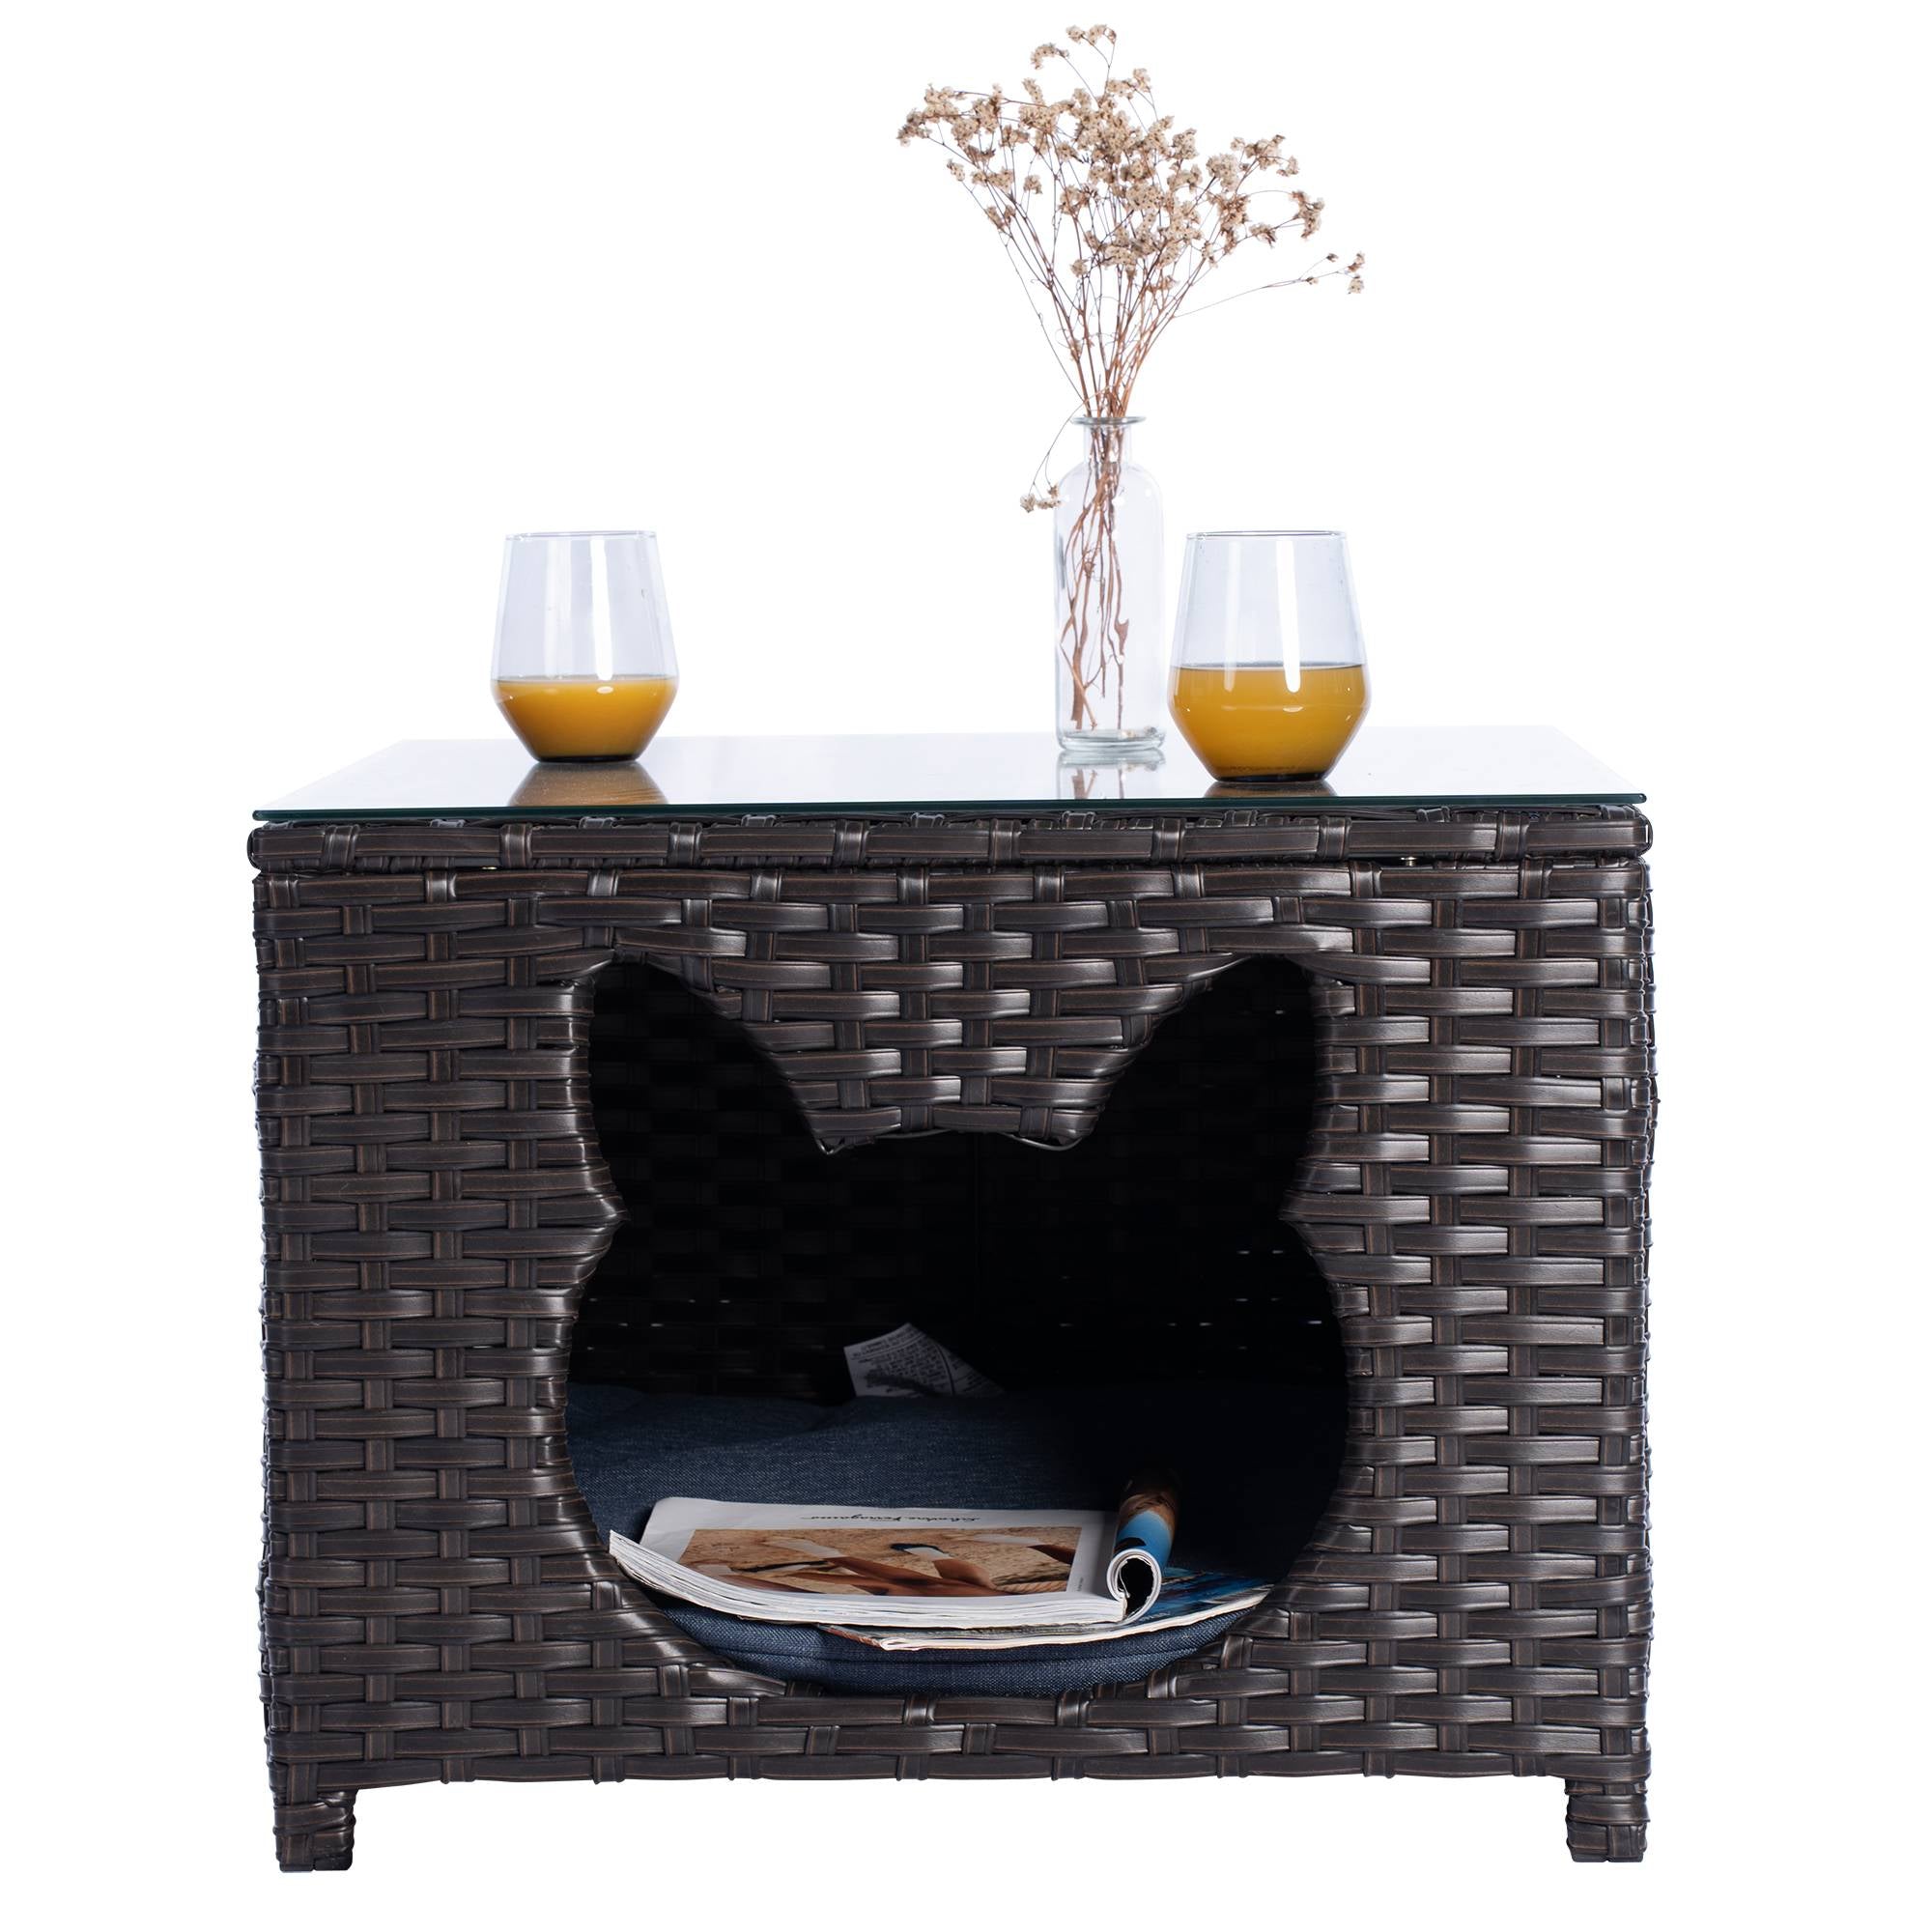 Ovios Pet Coffee Table for GRS/NTC/HOP/NDS Series.